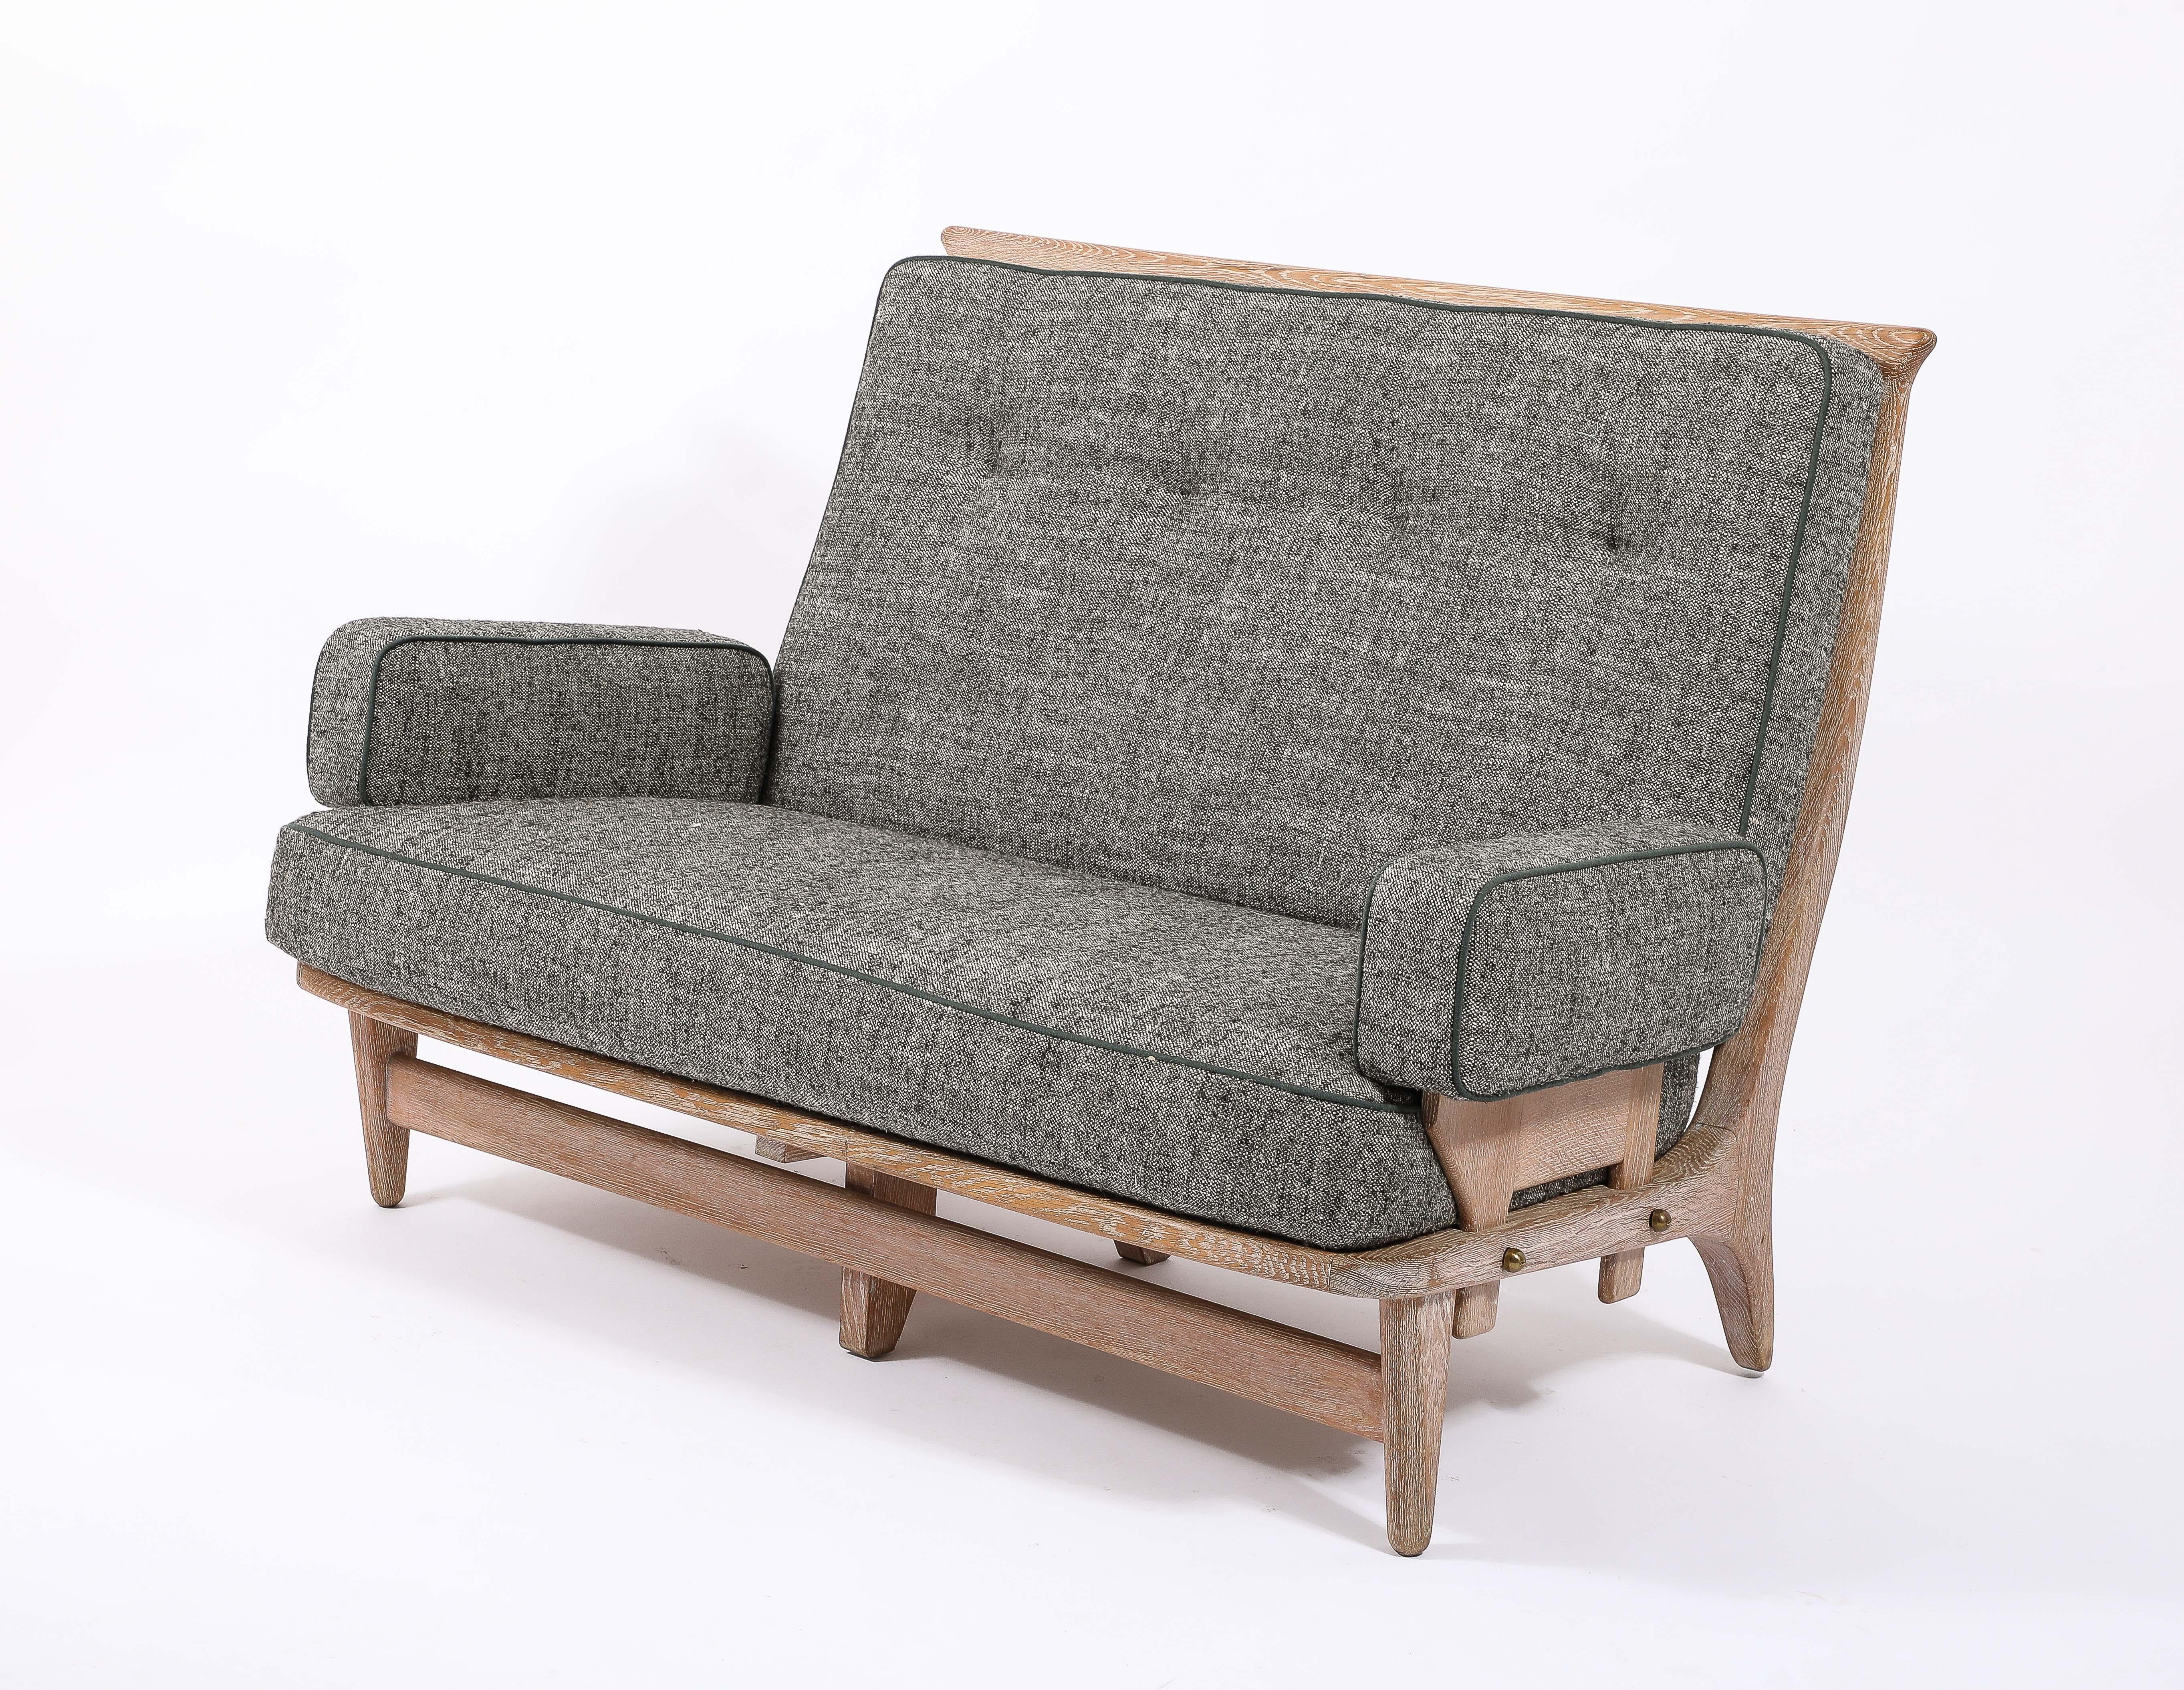 Guillerme & Chambron Settees in Oak, France 1960's For Sale 2